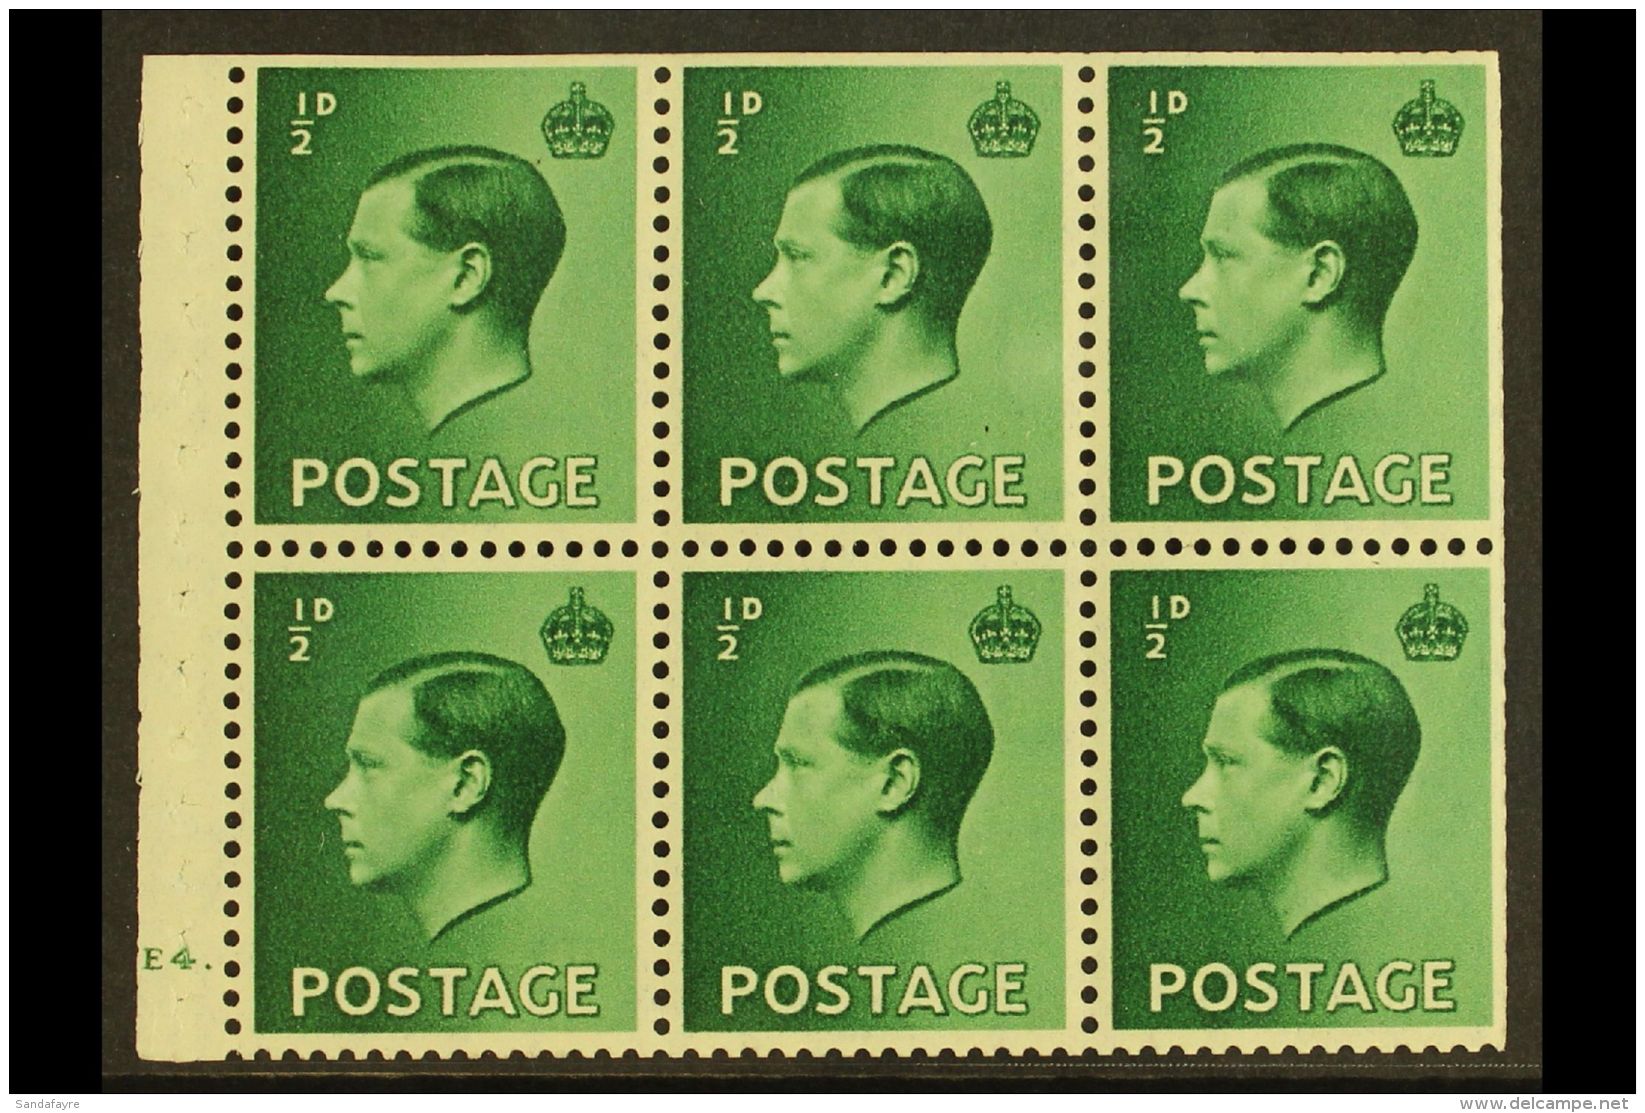 BOOKLET PANE 1936 &frac12;d Green Cylinder Booklet Pane, SG Spec PB1, Cylinder "E4 - Dot", Perforation Type B4(I),... - Non Classificati